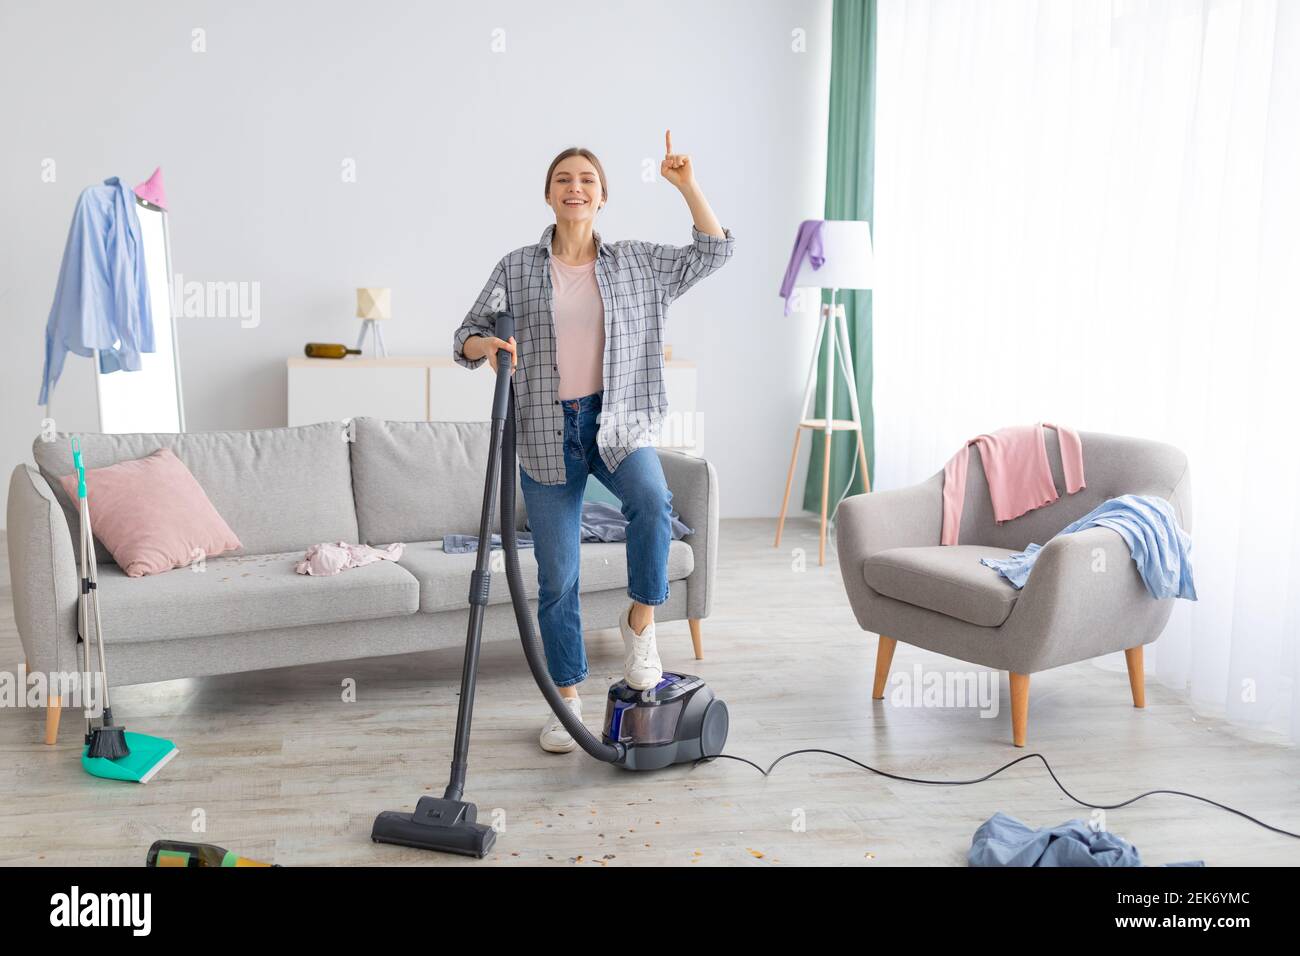 Happy young lady with vacuum cleaner having cleanup idea at messy room after party Stock Photo